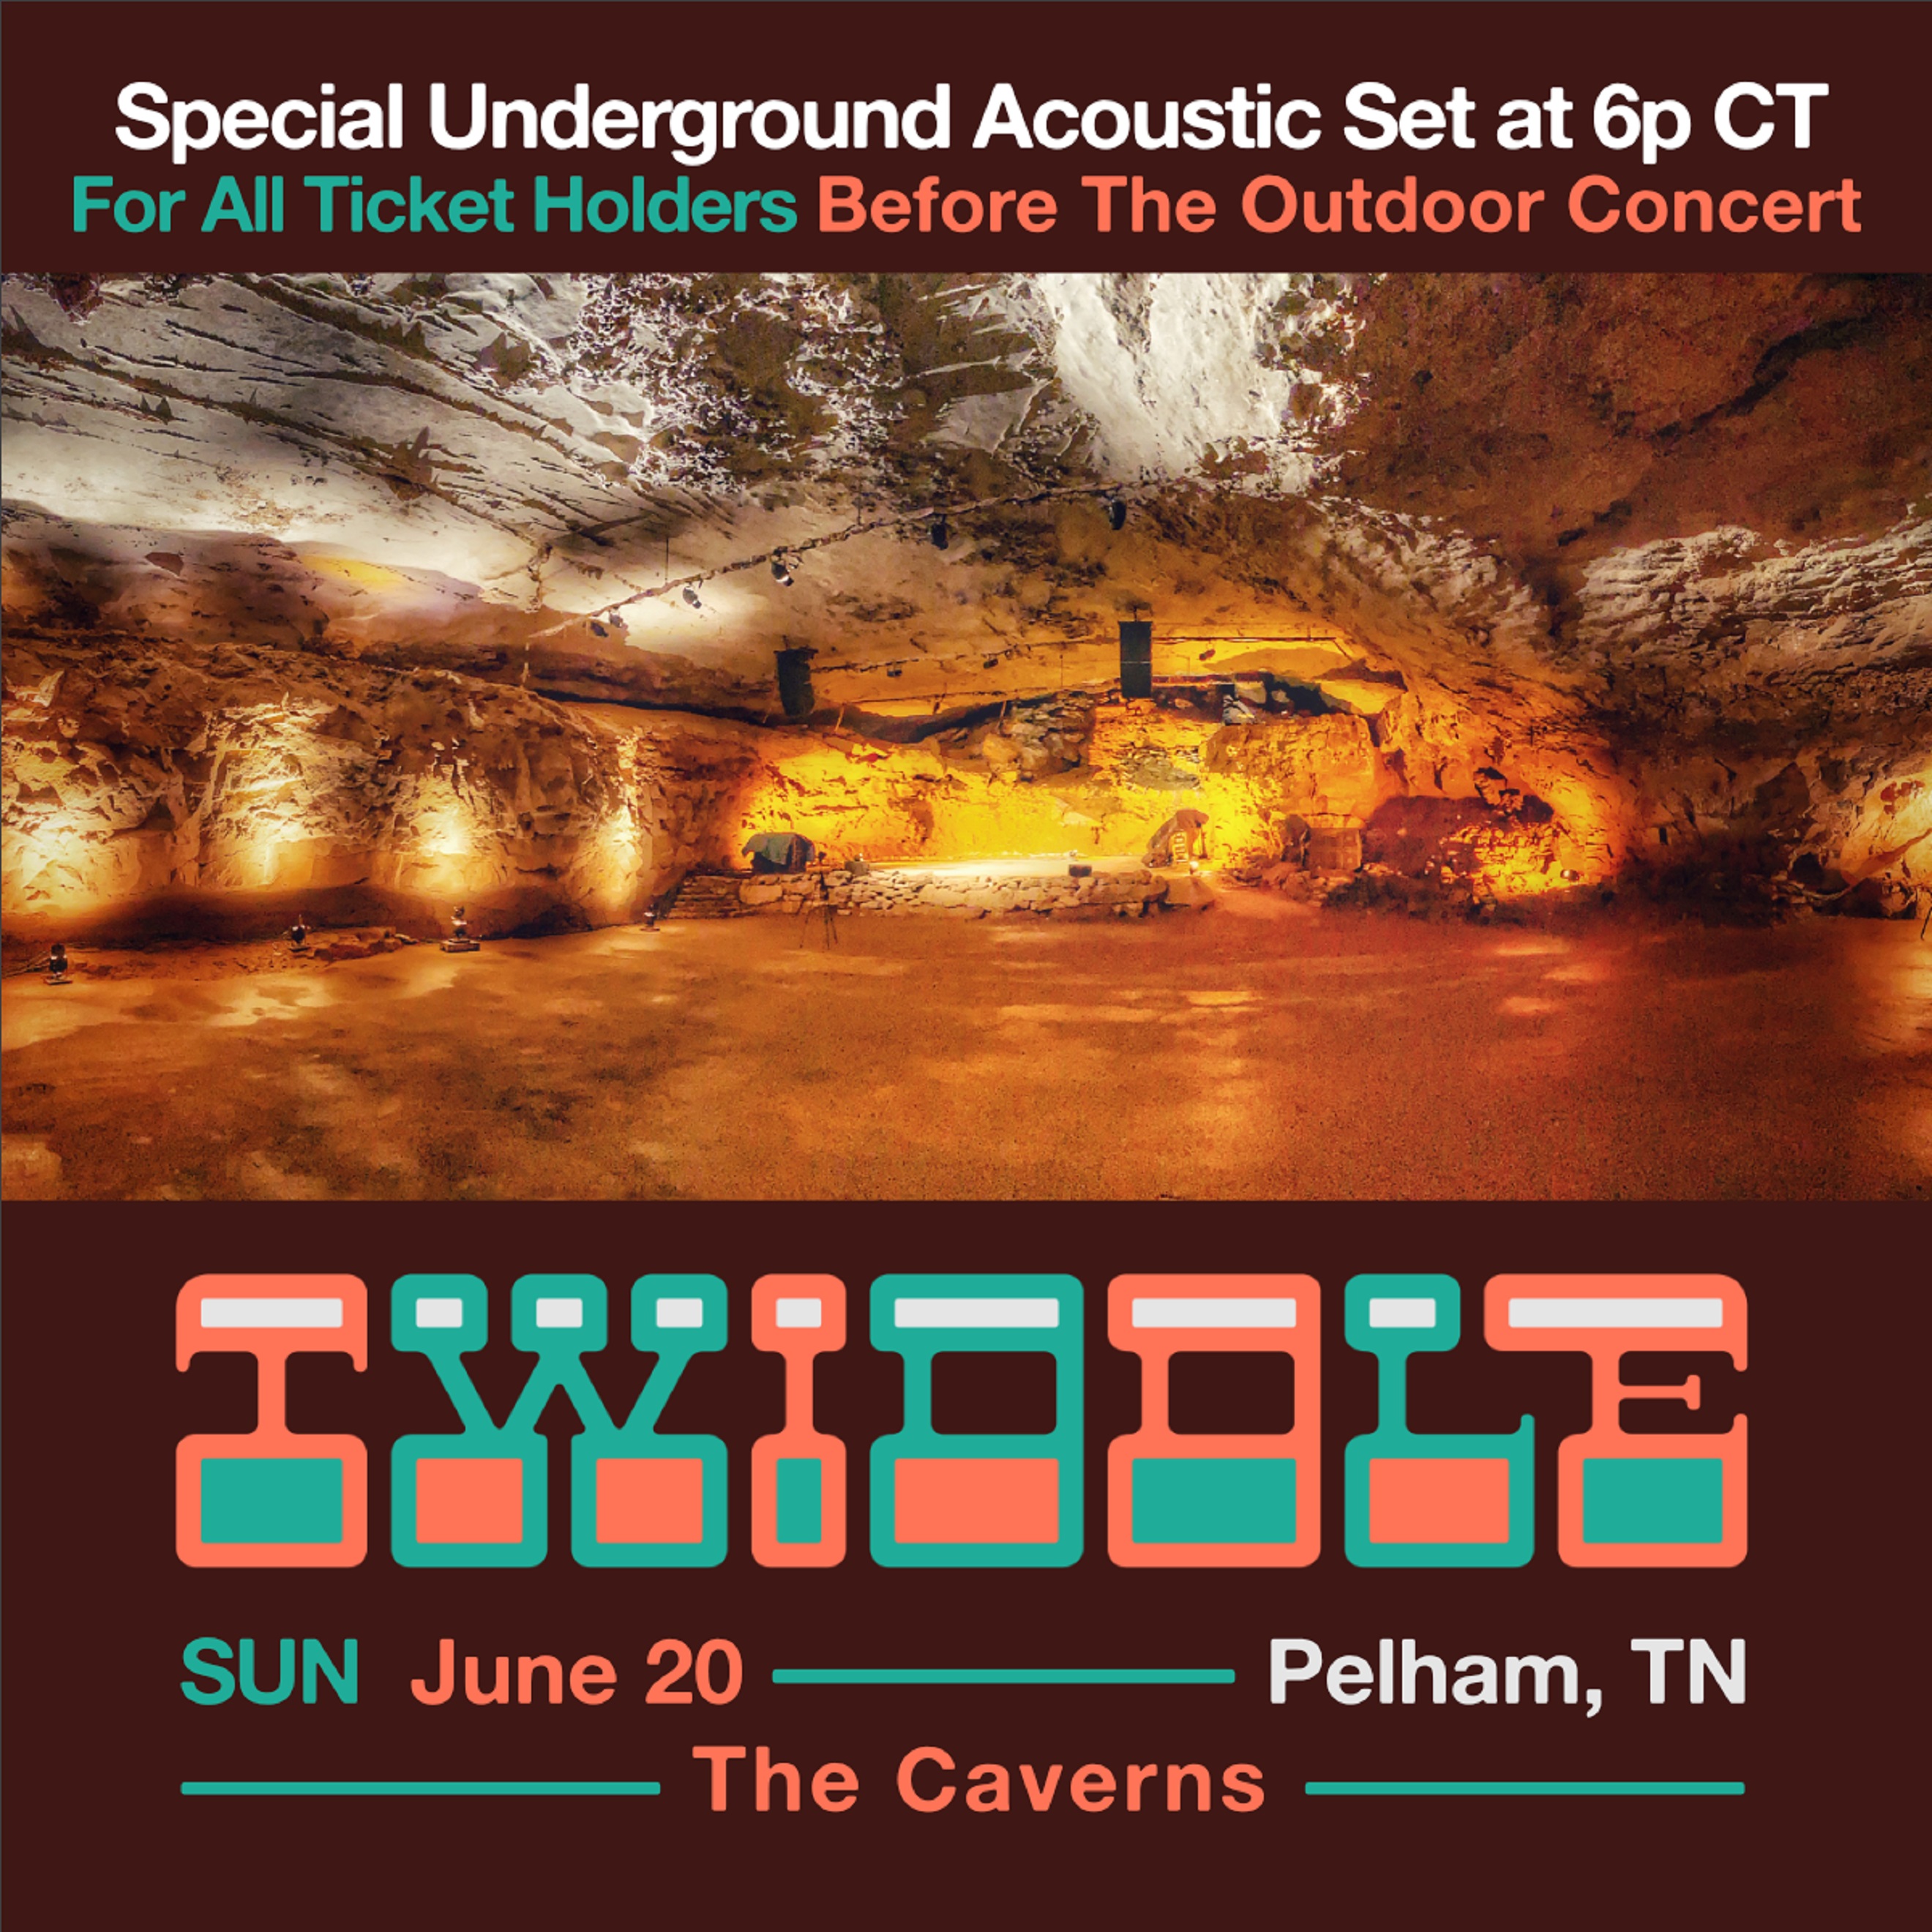 The Caverns Officially Reopens Its Subterranean Concert Hall with Twiddle, June 20th